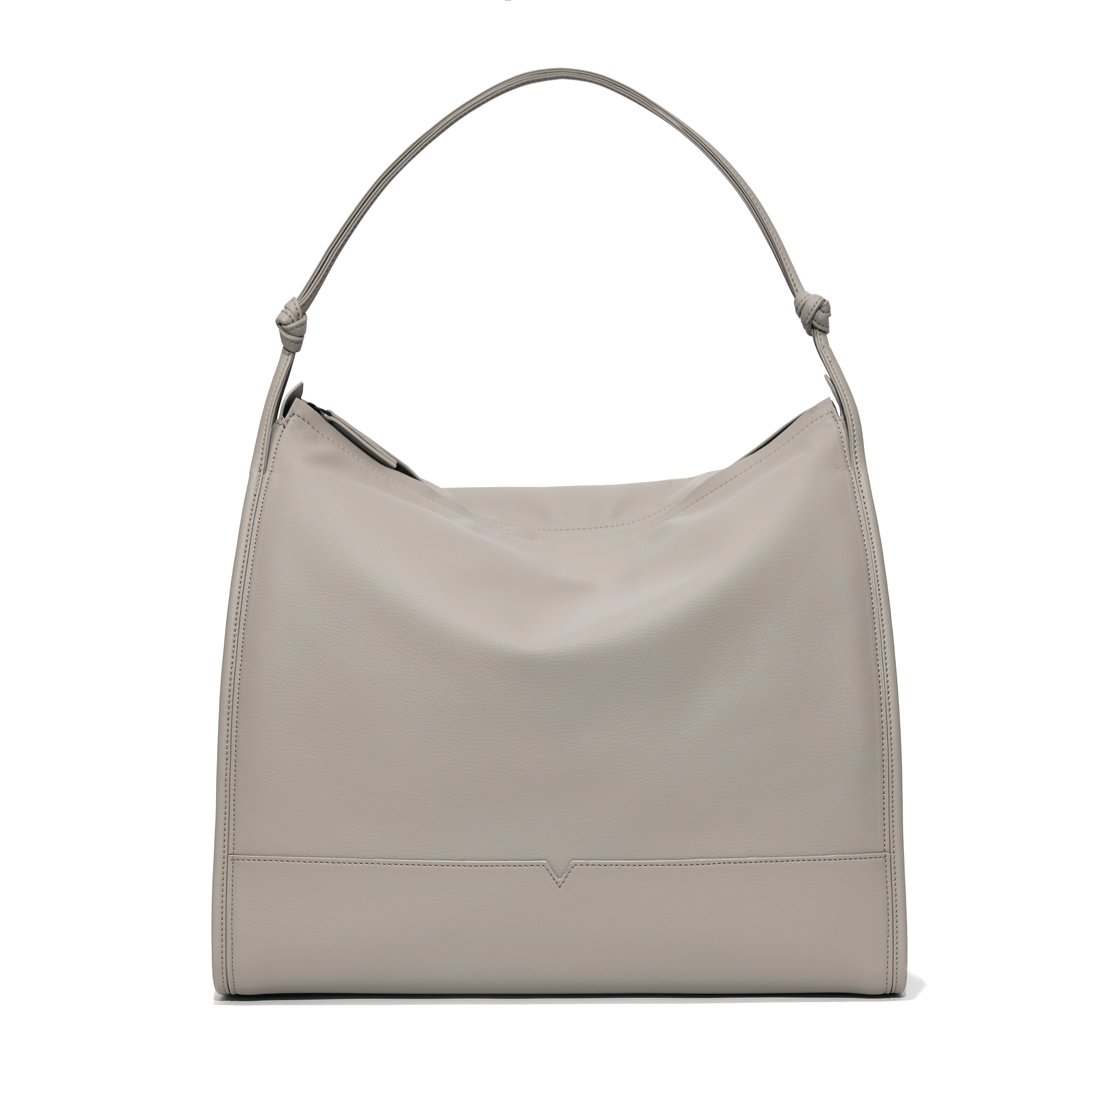 The Shoulder Bag in Banbū Leather in Stone image 10